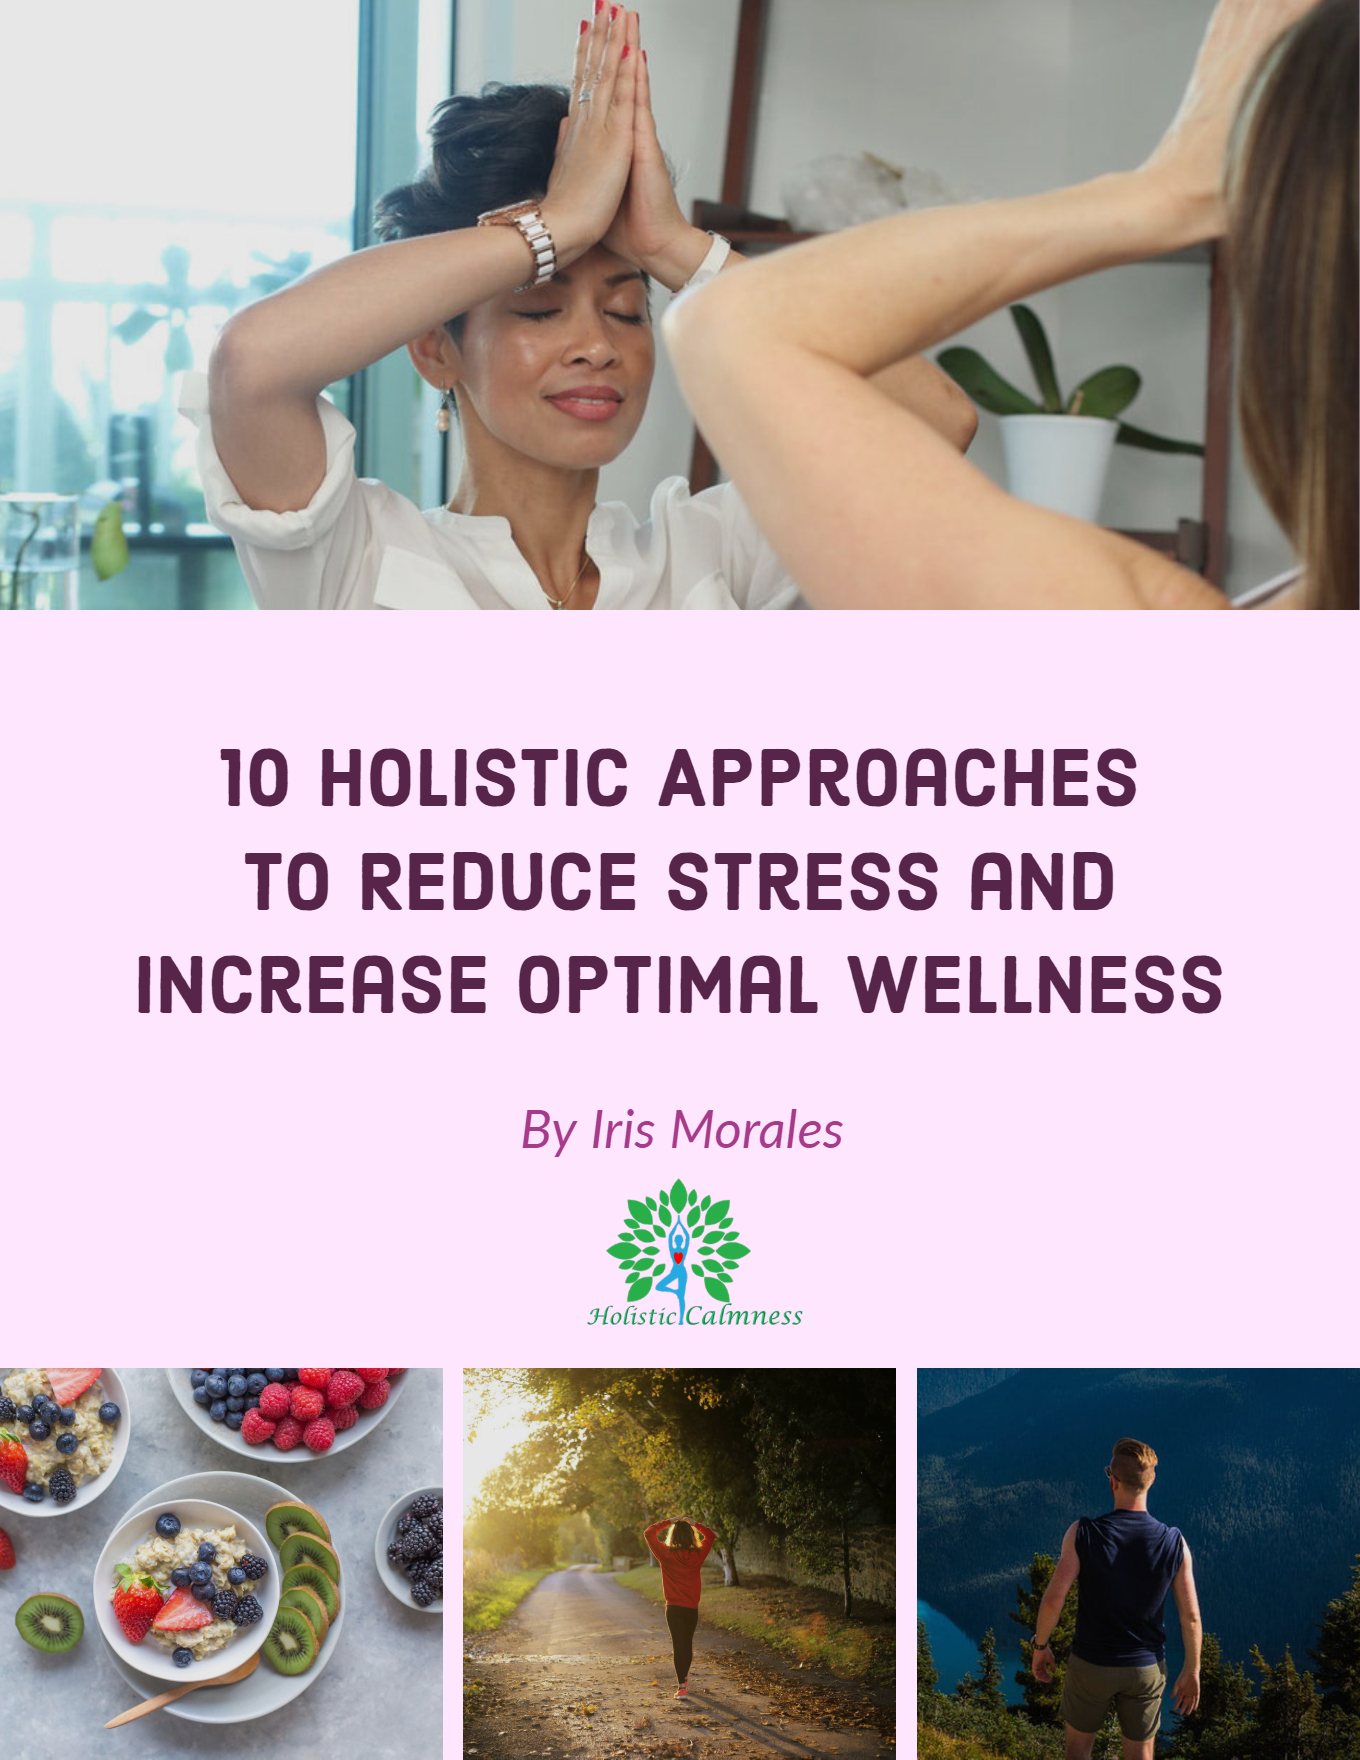 10 Holistic Approaches to Reduce Stress and increase Optimal Wellness